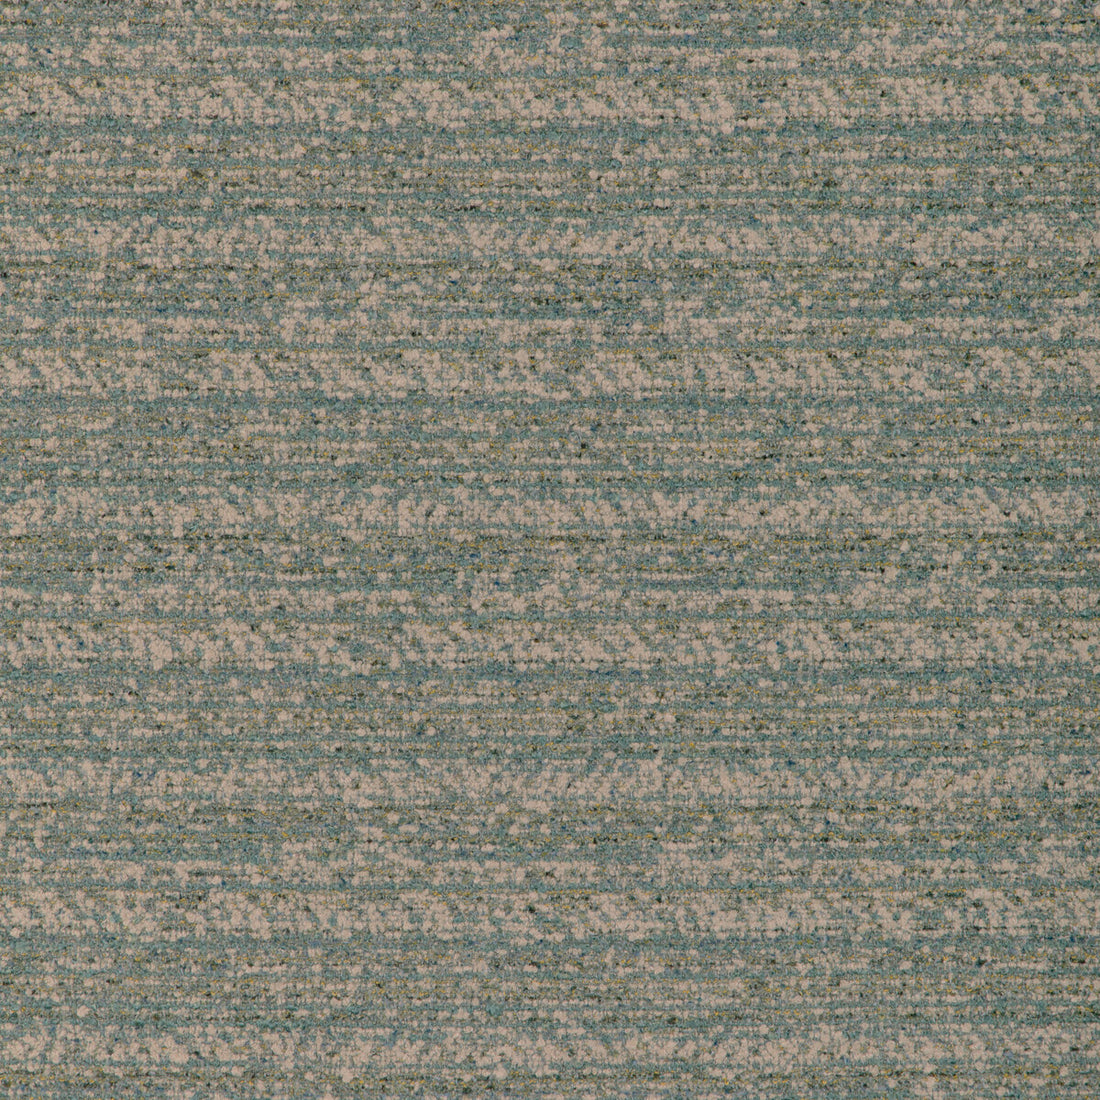 Kravet Smart fabric in 37209-1613 color - pattern 37209.1613.0 - by Kravet Smart in the Woven Colors collection